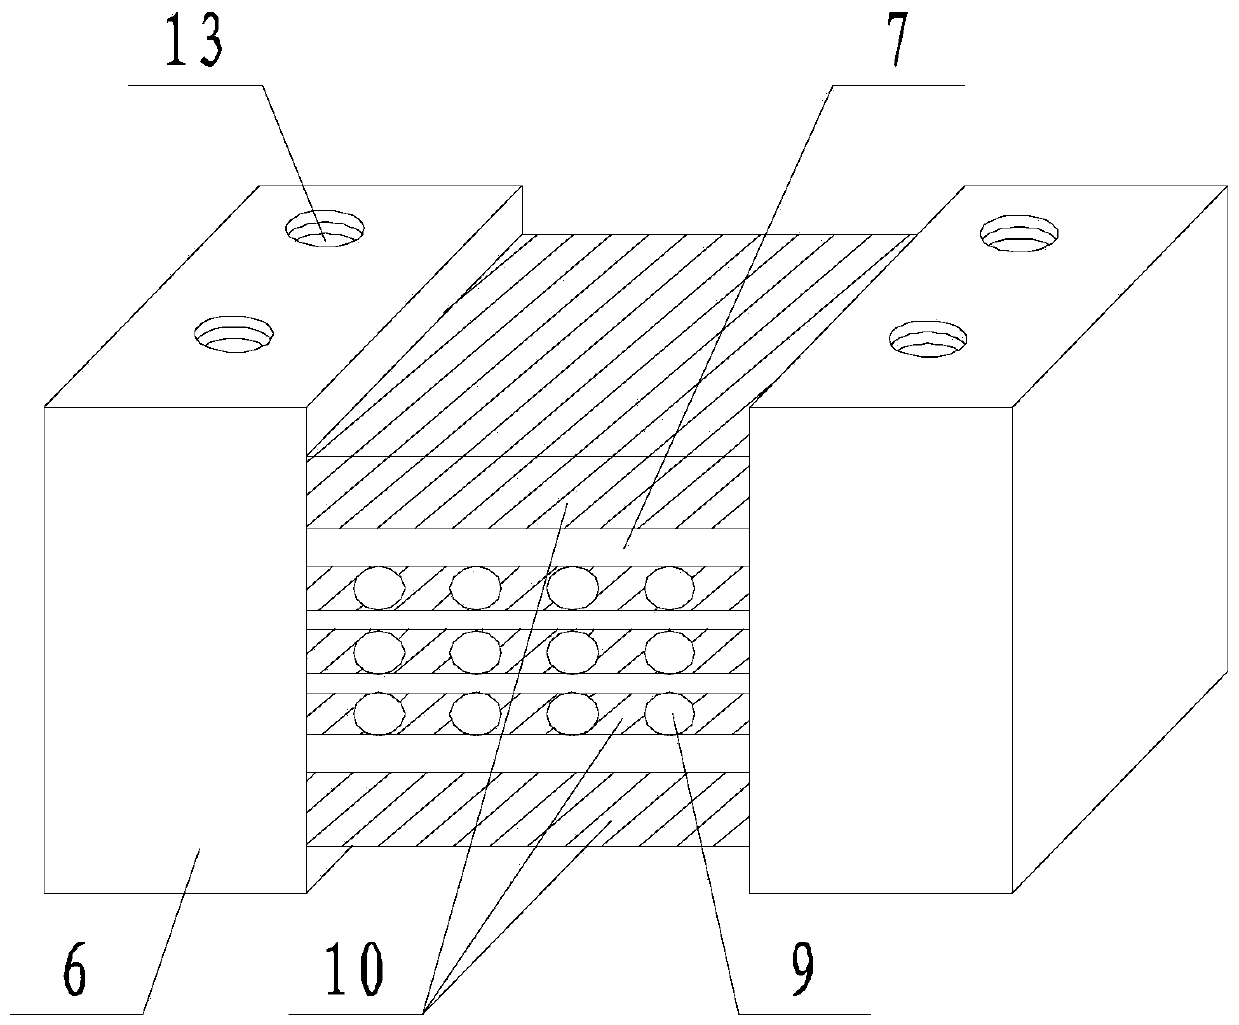 Connection node and method for reinforced concrete conversion column wrapping reinforced concrete conversion beam